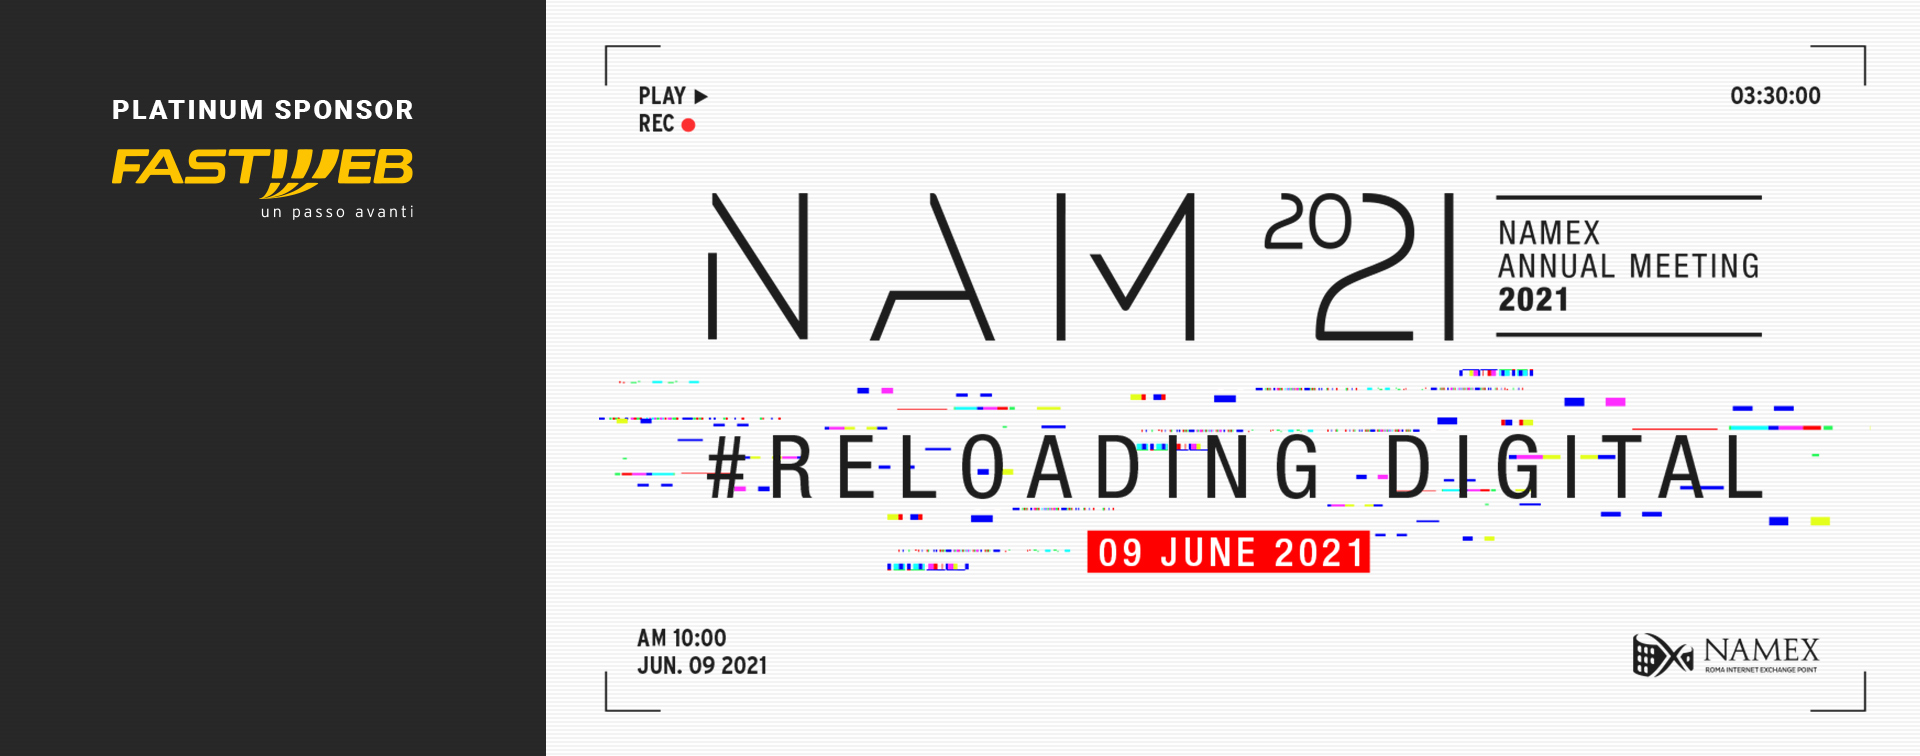 Fastweb is Platinum Sponsor of #Reloading Digital, the Namex Annual Meeting 2021 edition. During the opening conference, Fastweb CEO Alberto Calcagno.